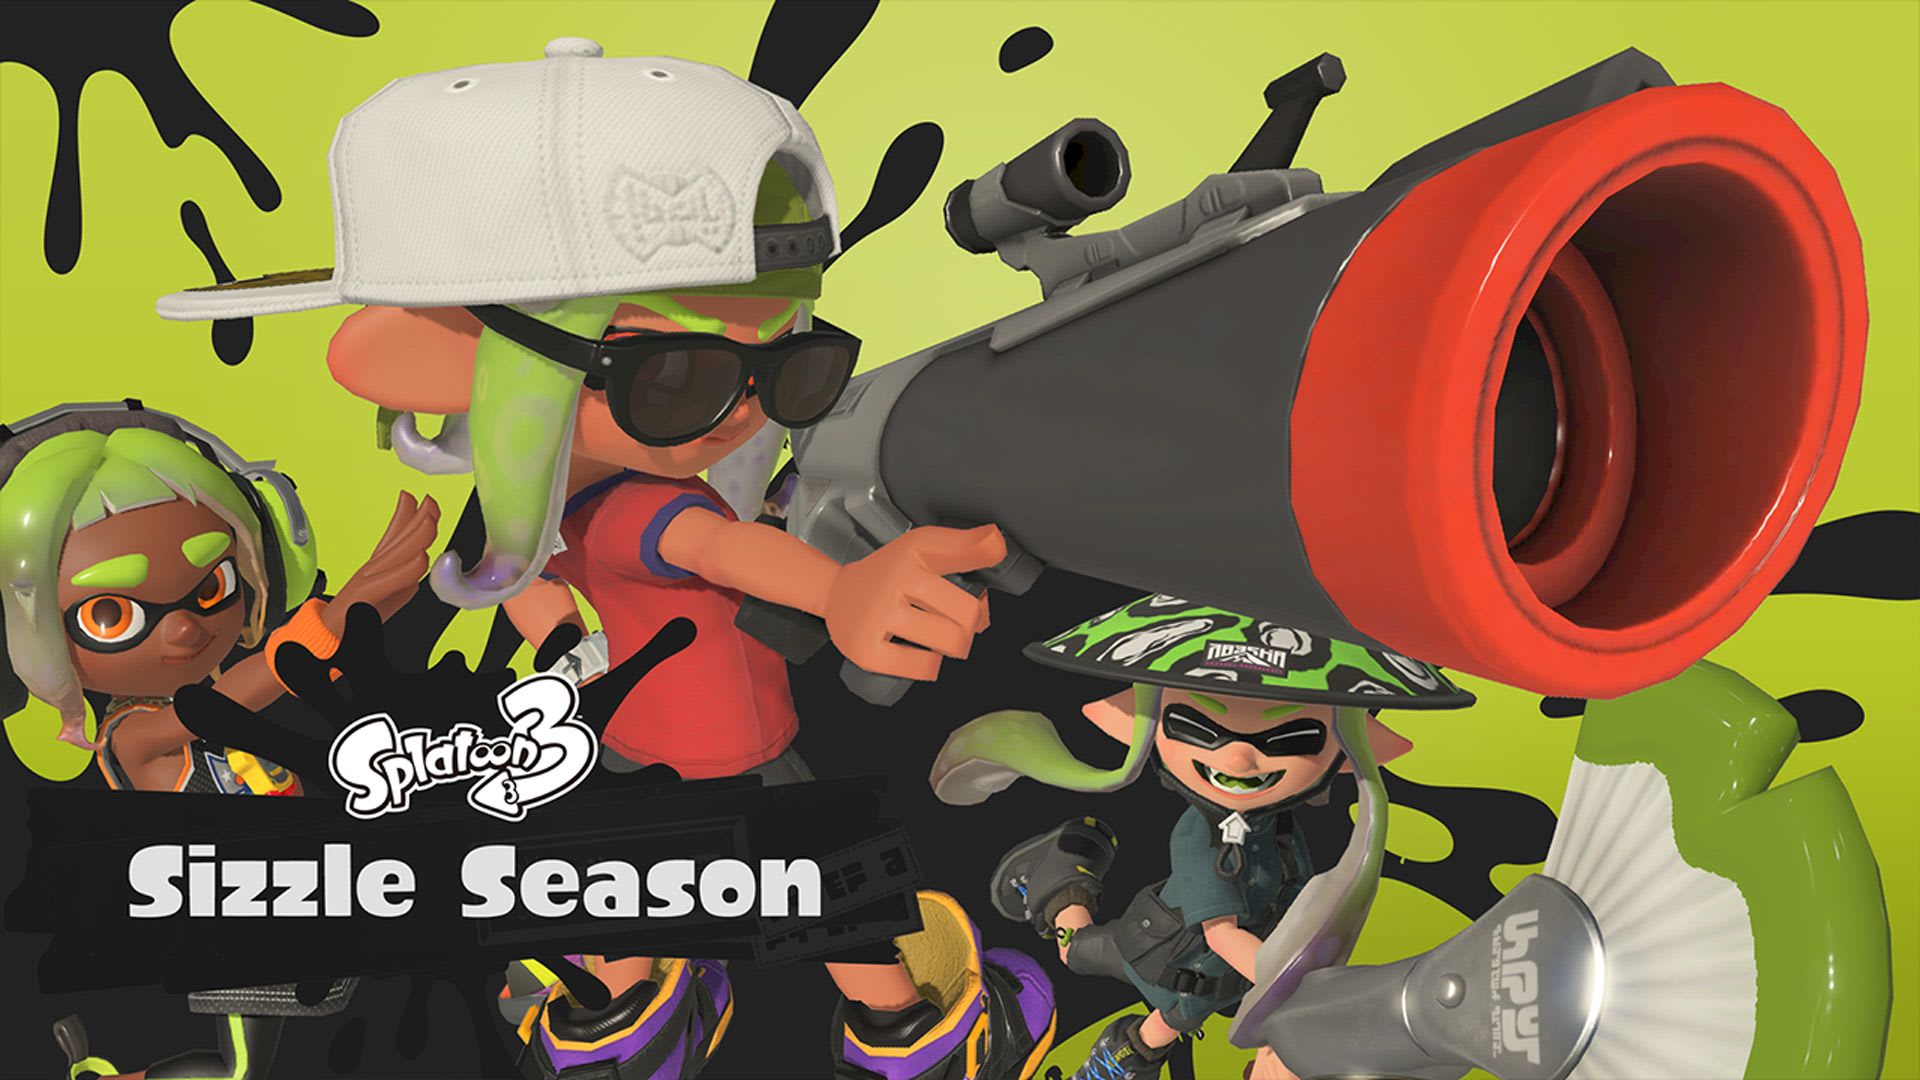 Splatoon 3 Sizzle Season adds new weapons, stages, challenges, and more